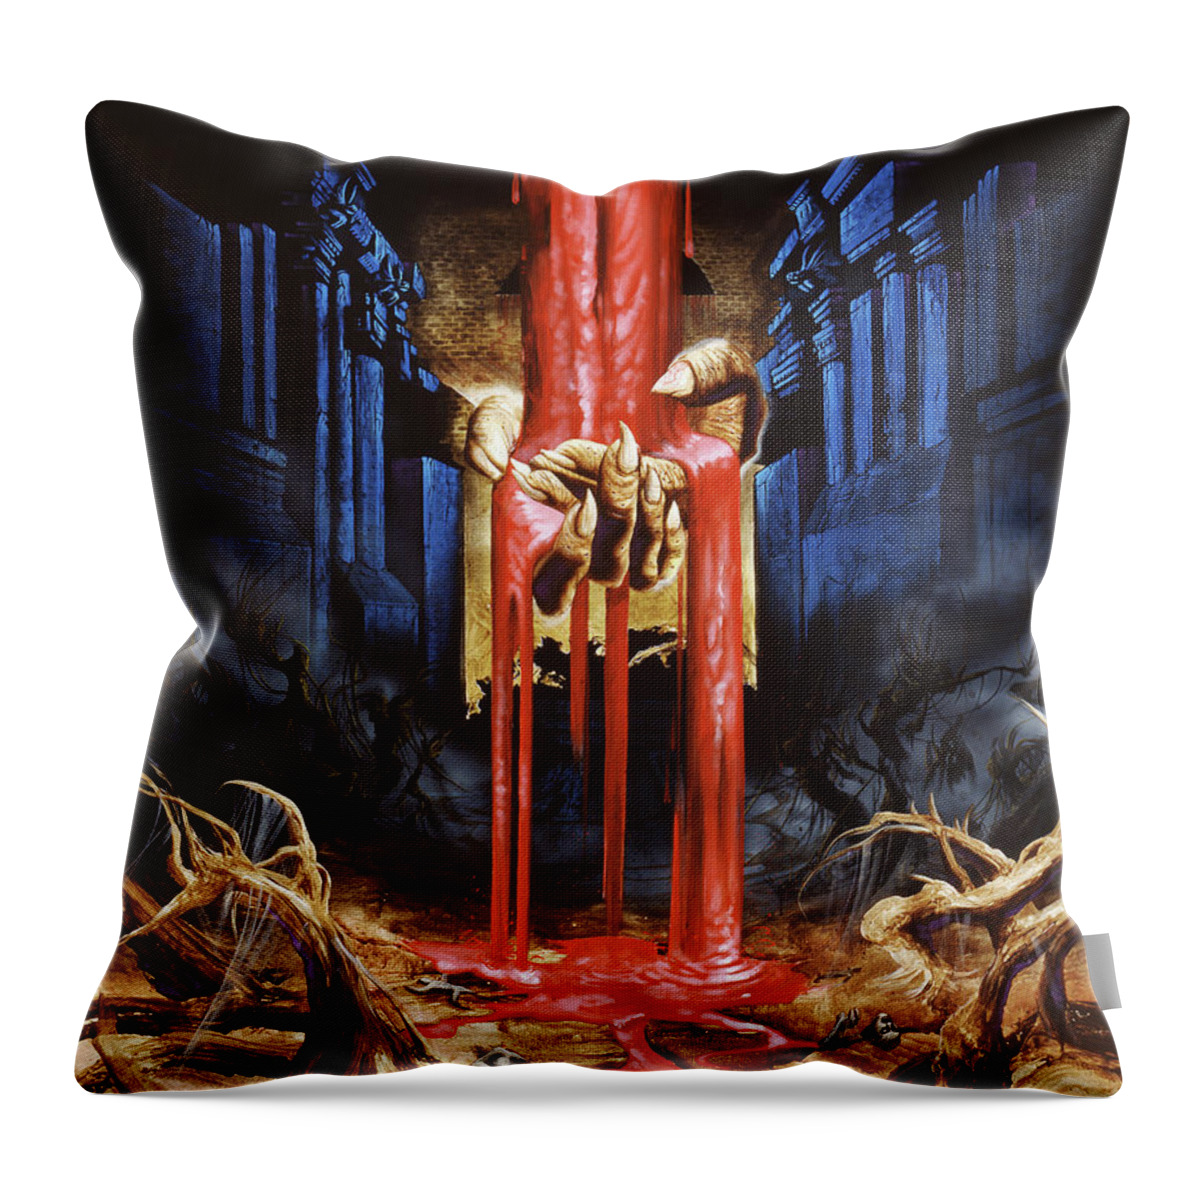 Heavy Metal Throw Pillow featuring the painting Gutted - Bleed For Us To Live by Sv Bell